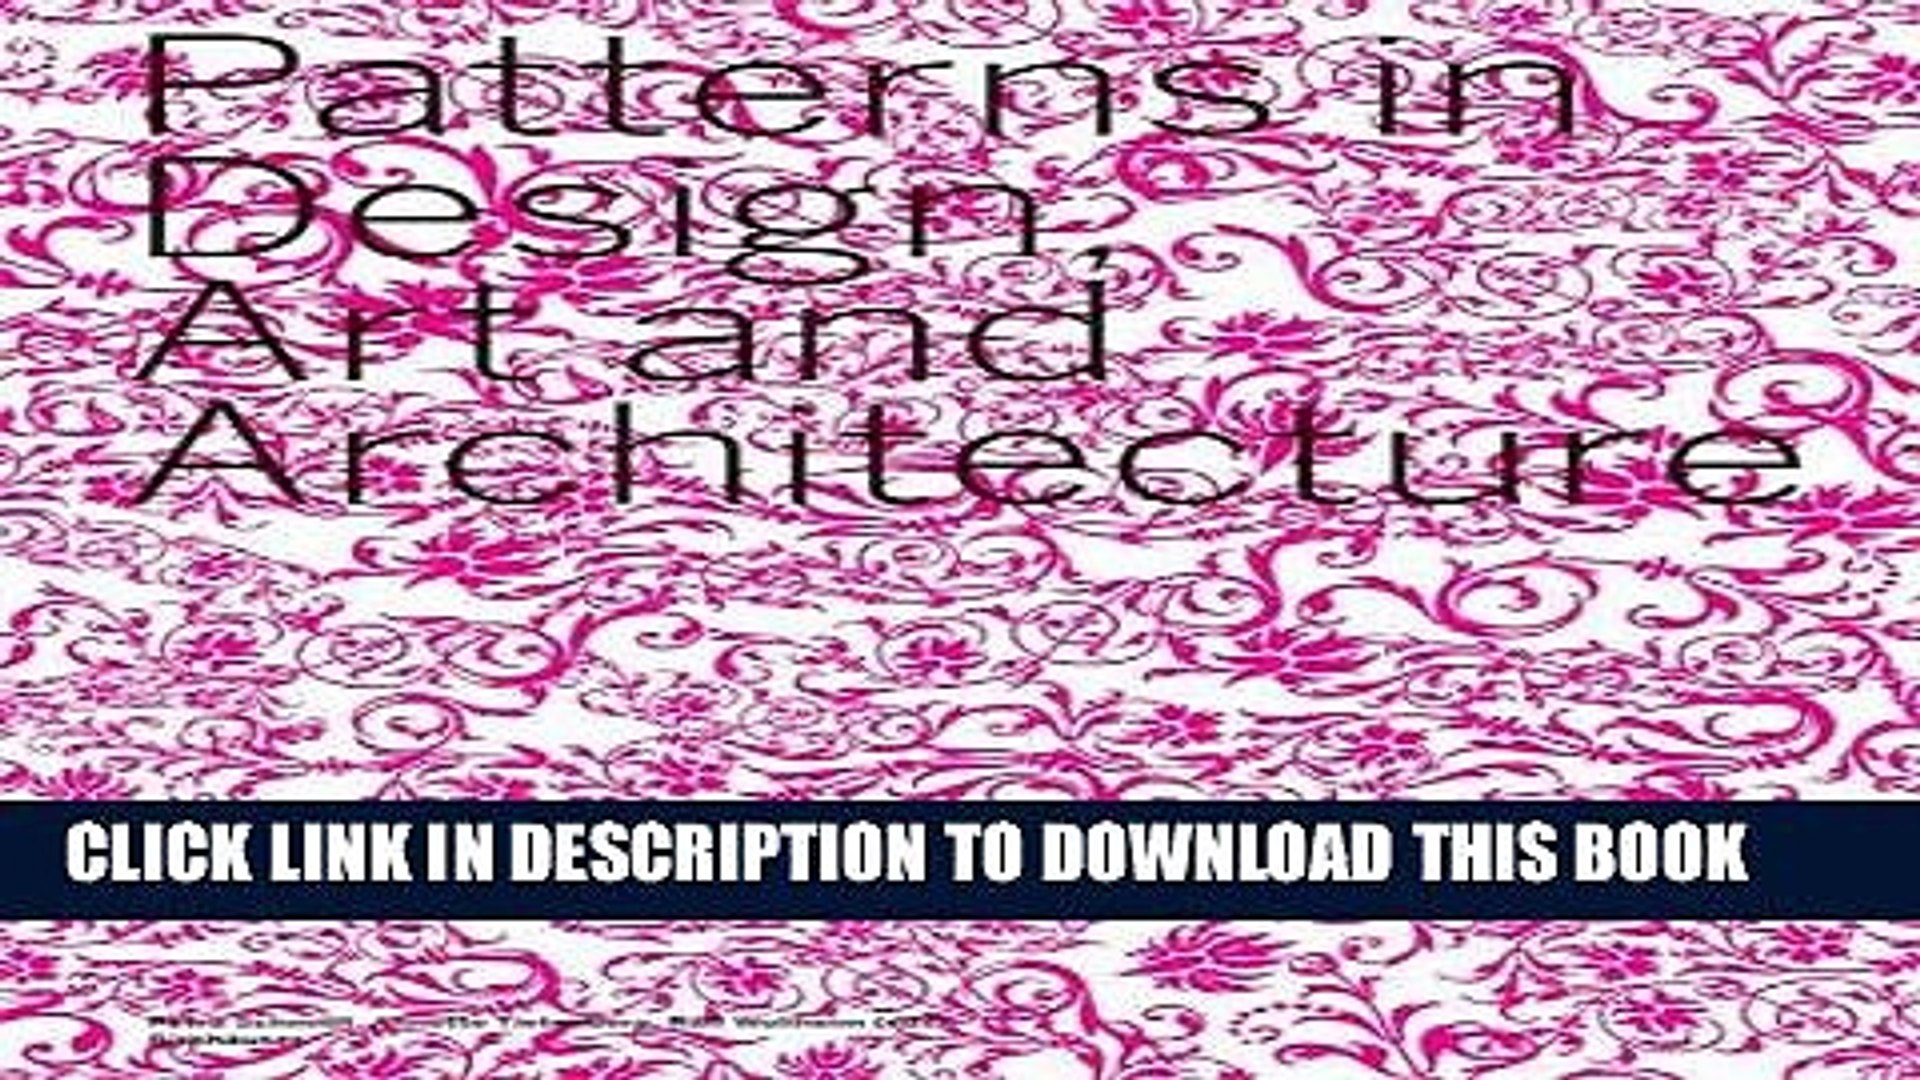 [PDF] Patterns in Design, Art and Architecture Full Online